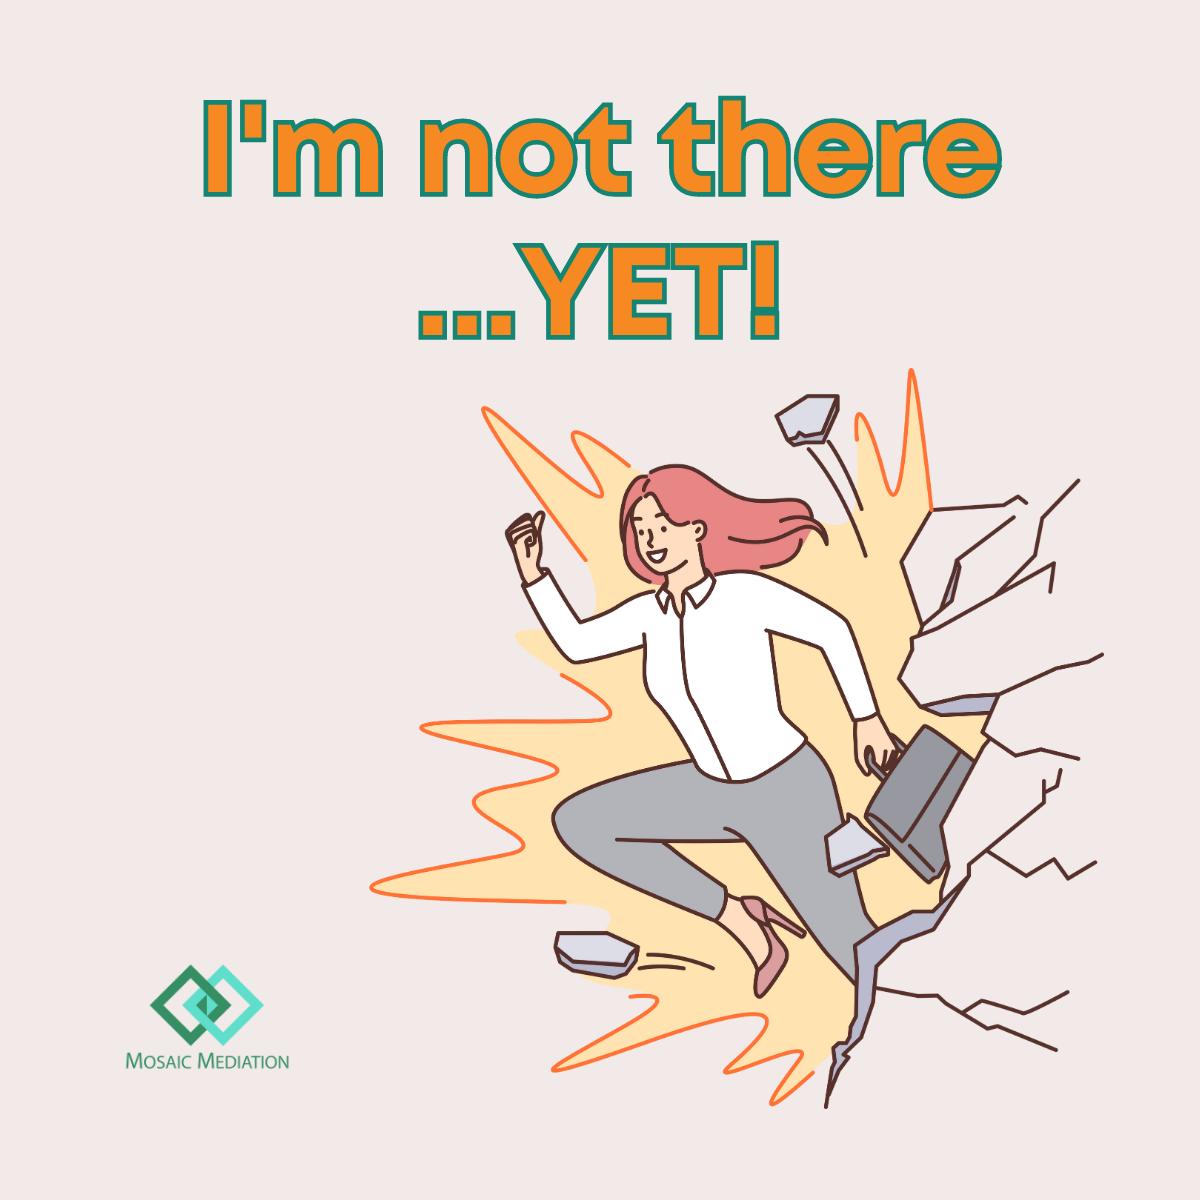 Image: Woman breaking through a wall. Text: 'I'm Not There...Yet!' Logo: Mosaic Mediation